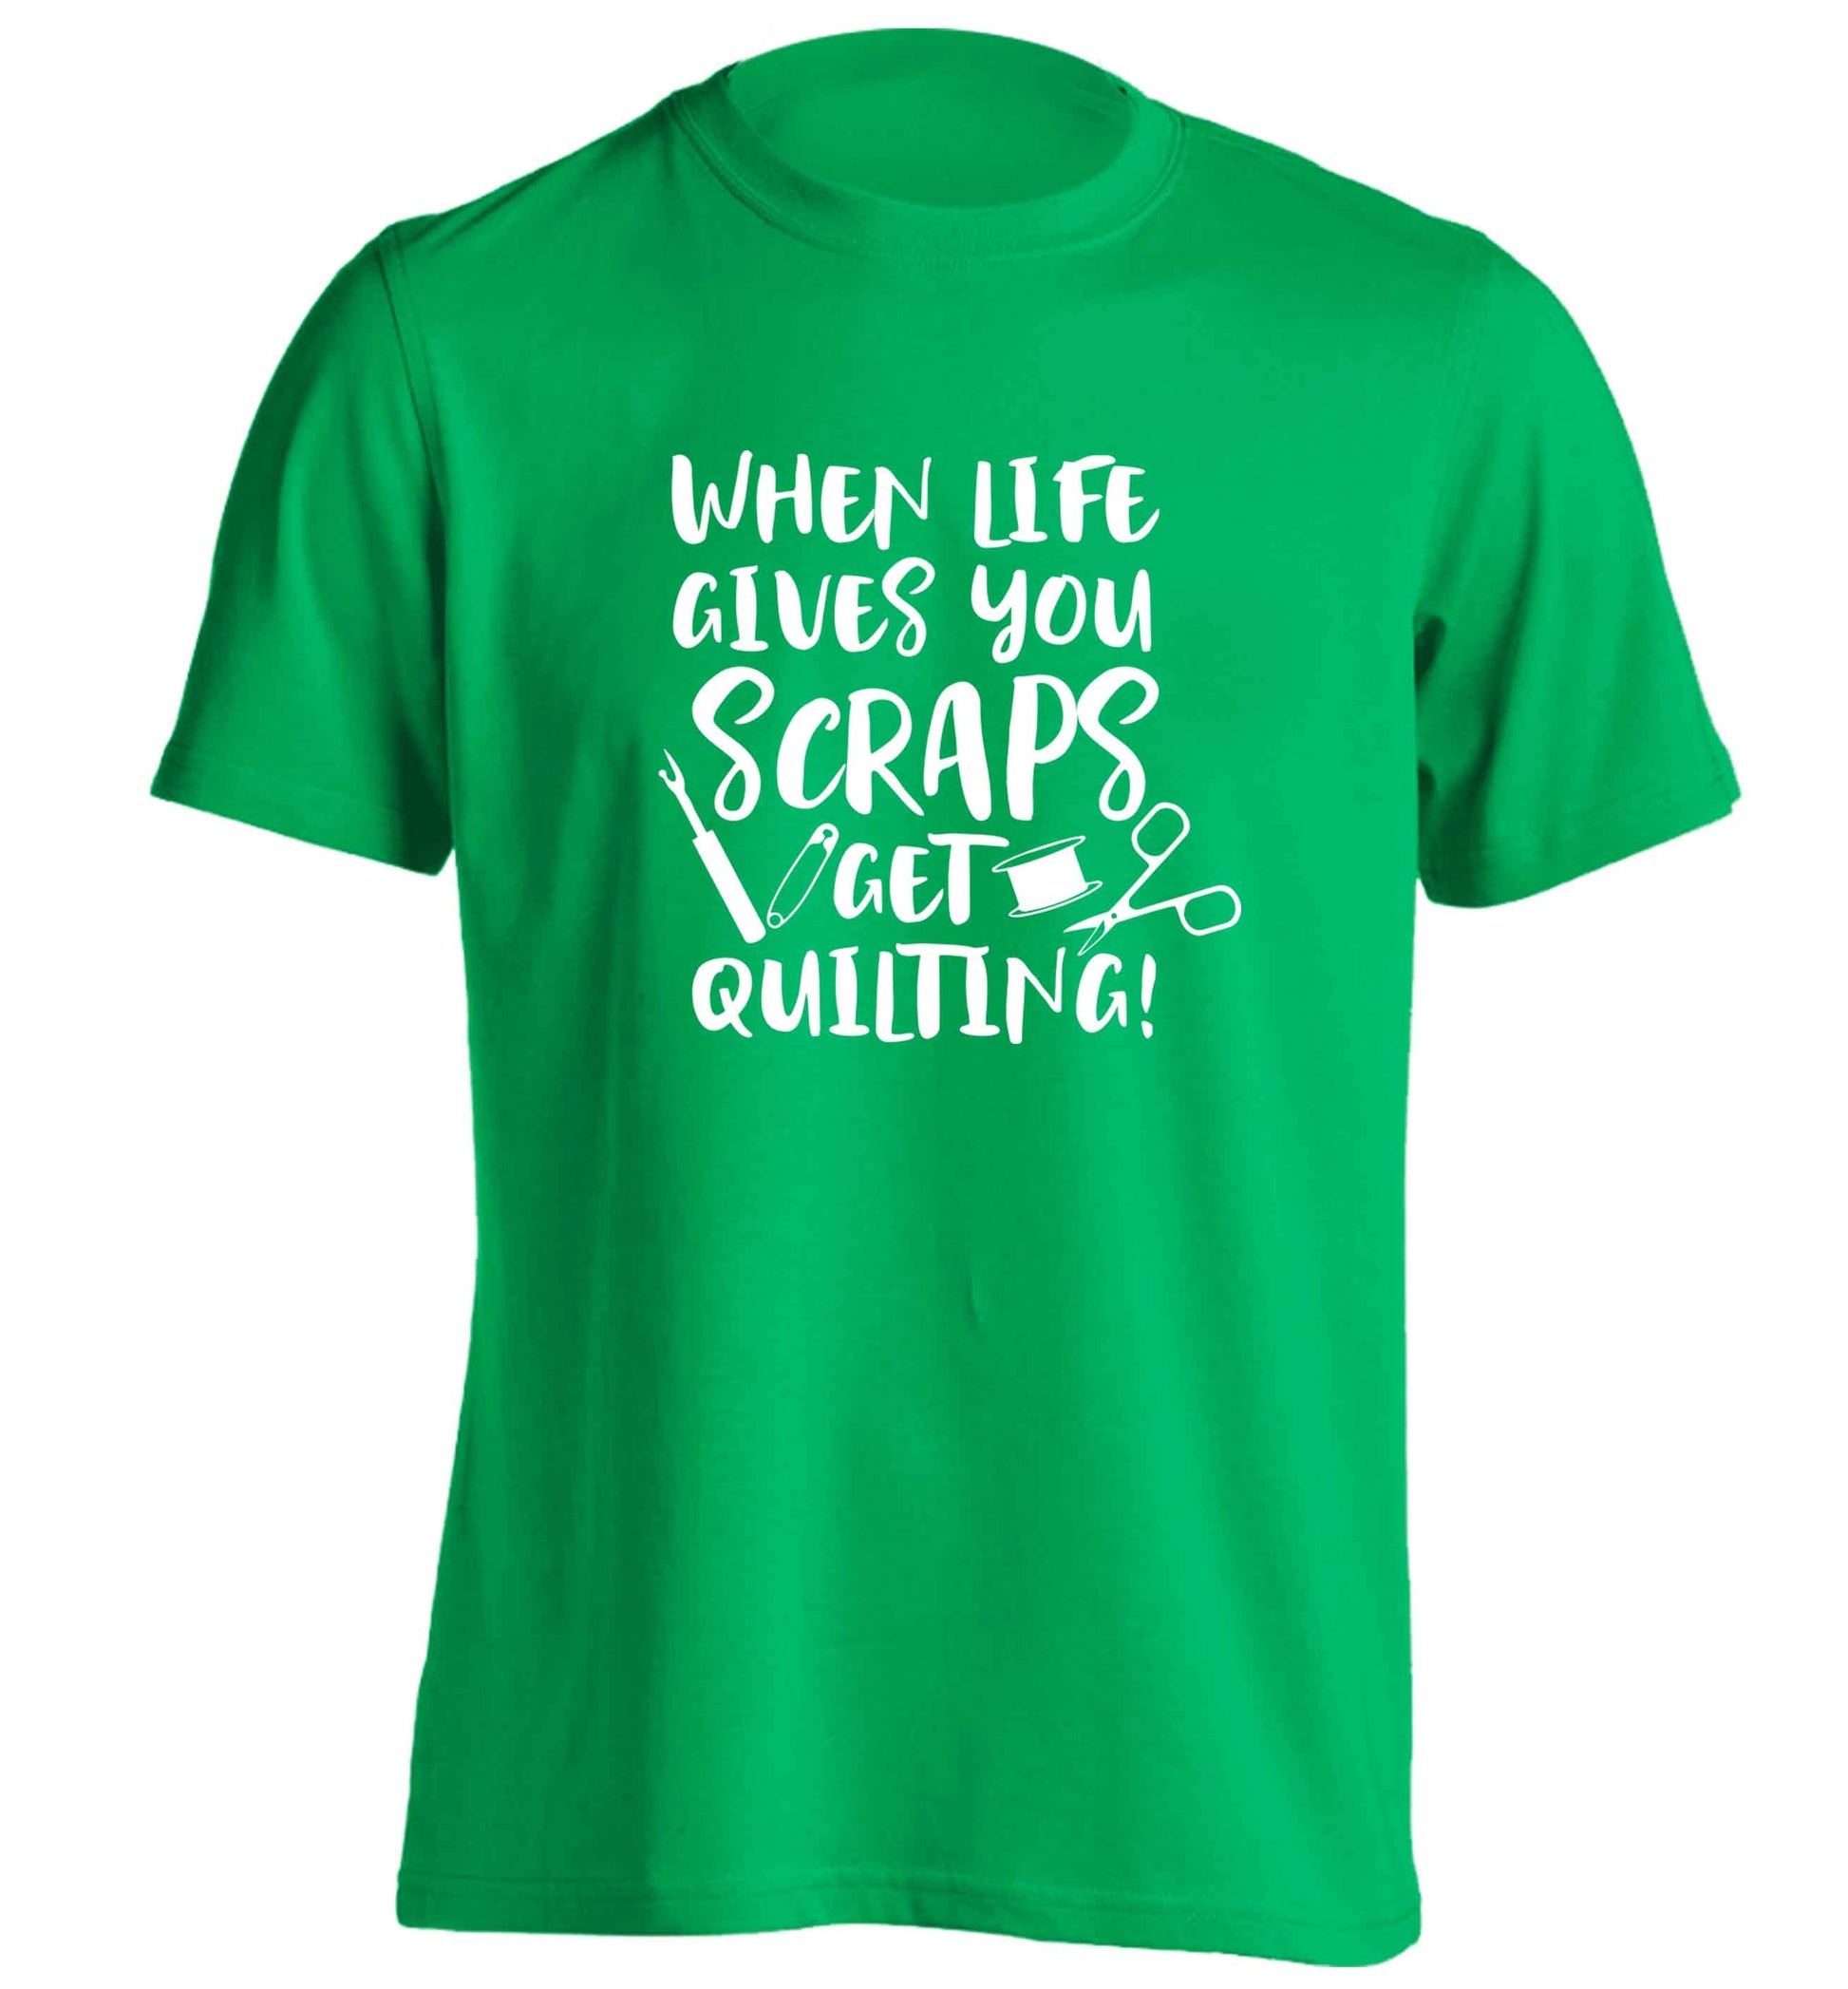 When life gives you scraps get quilting! adults unisex green Tshirt 2XL